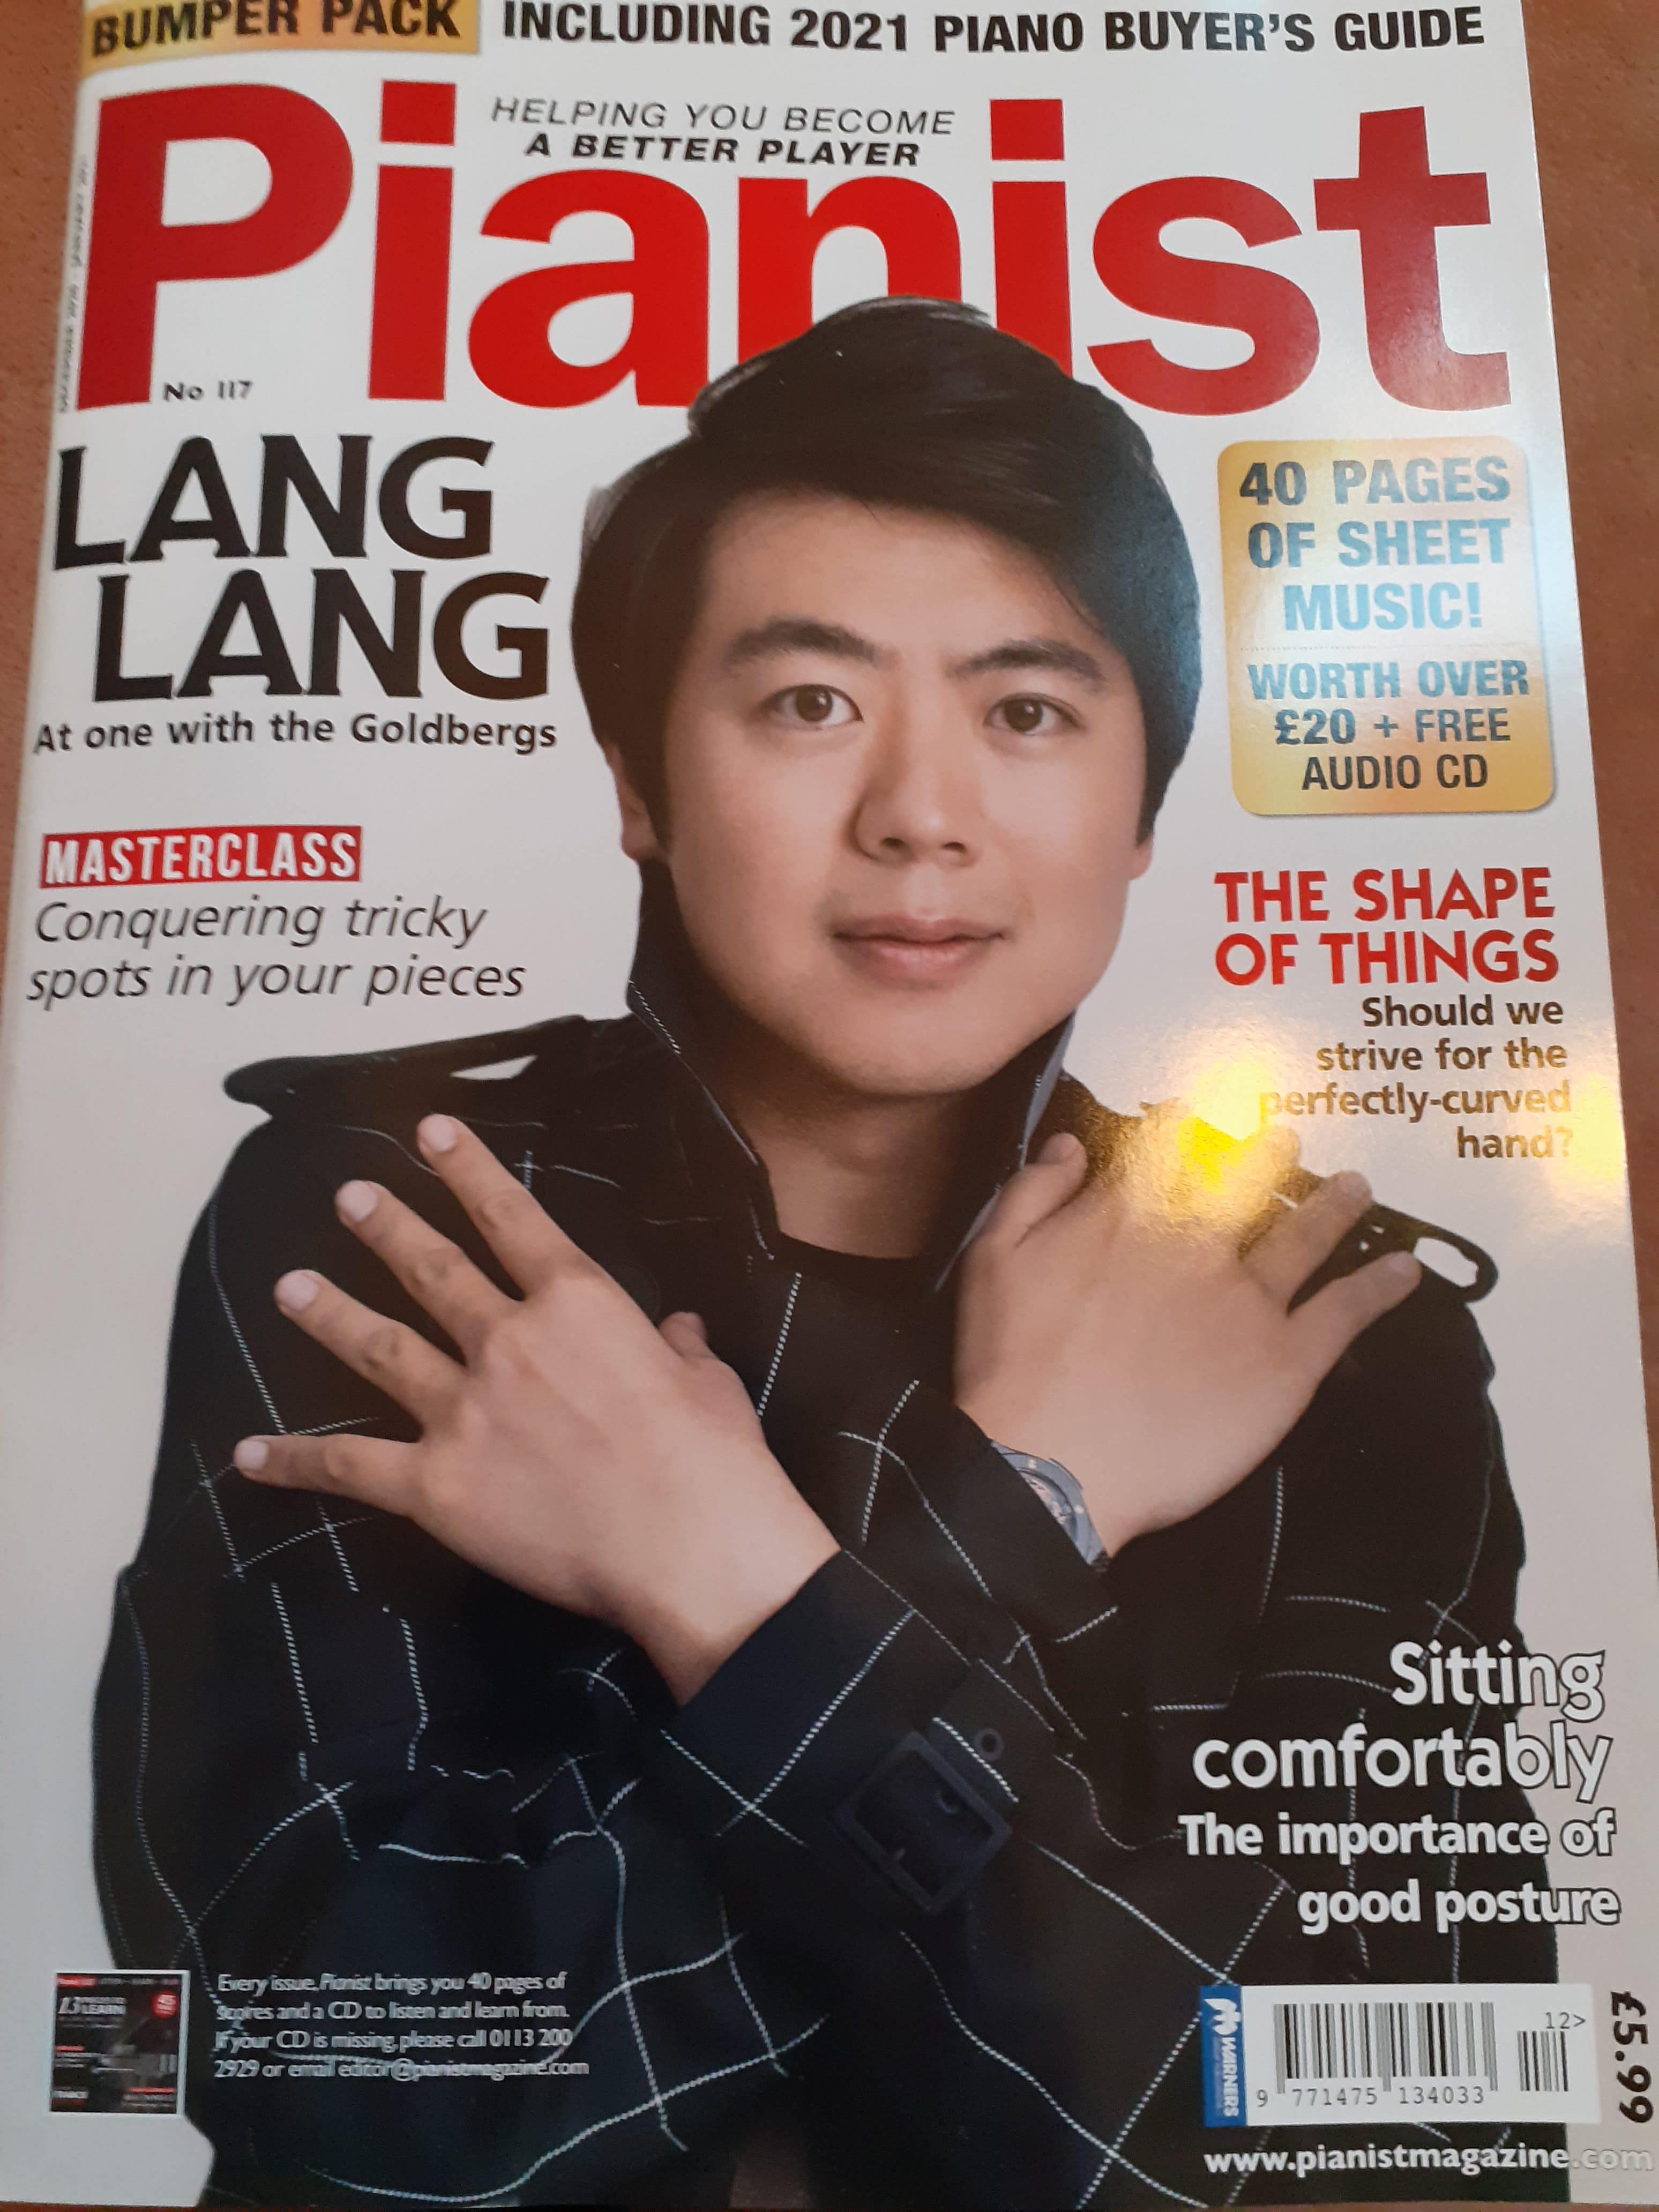 Lang Lang and his tricky spots